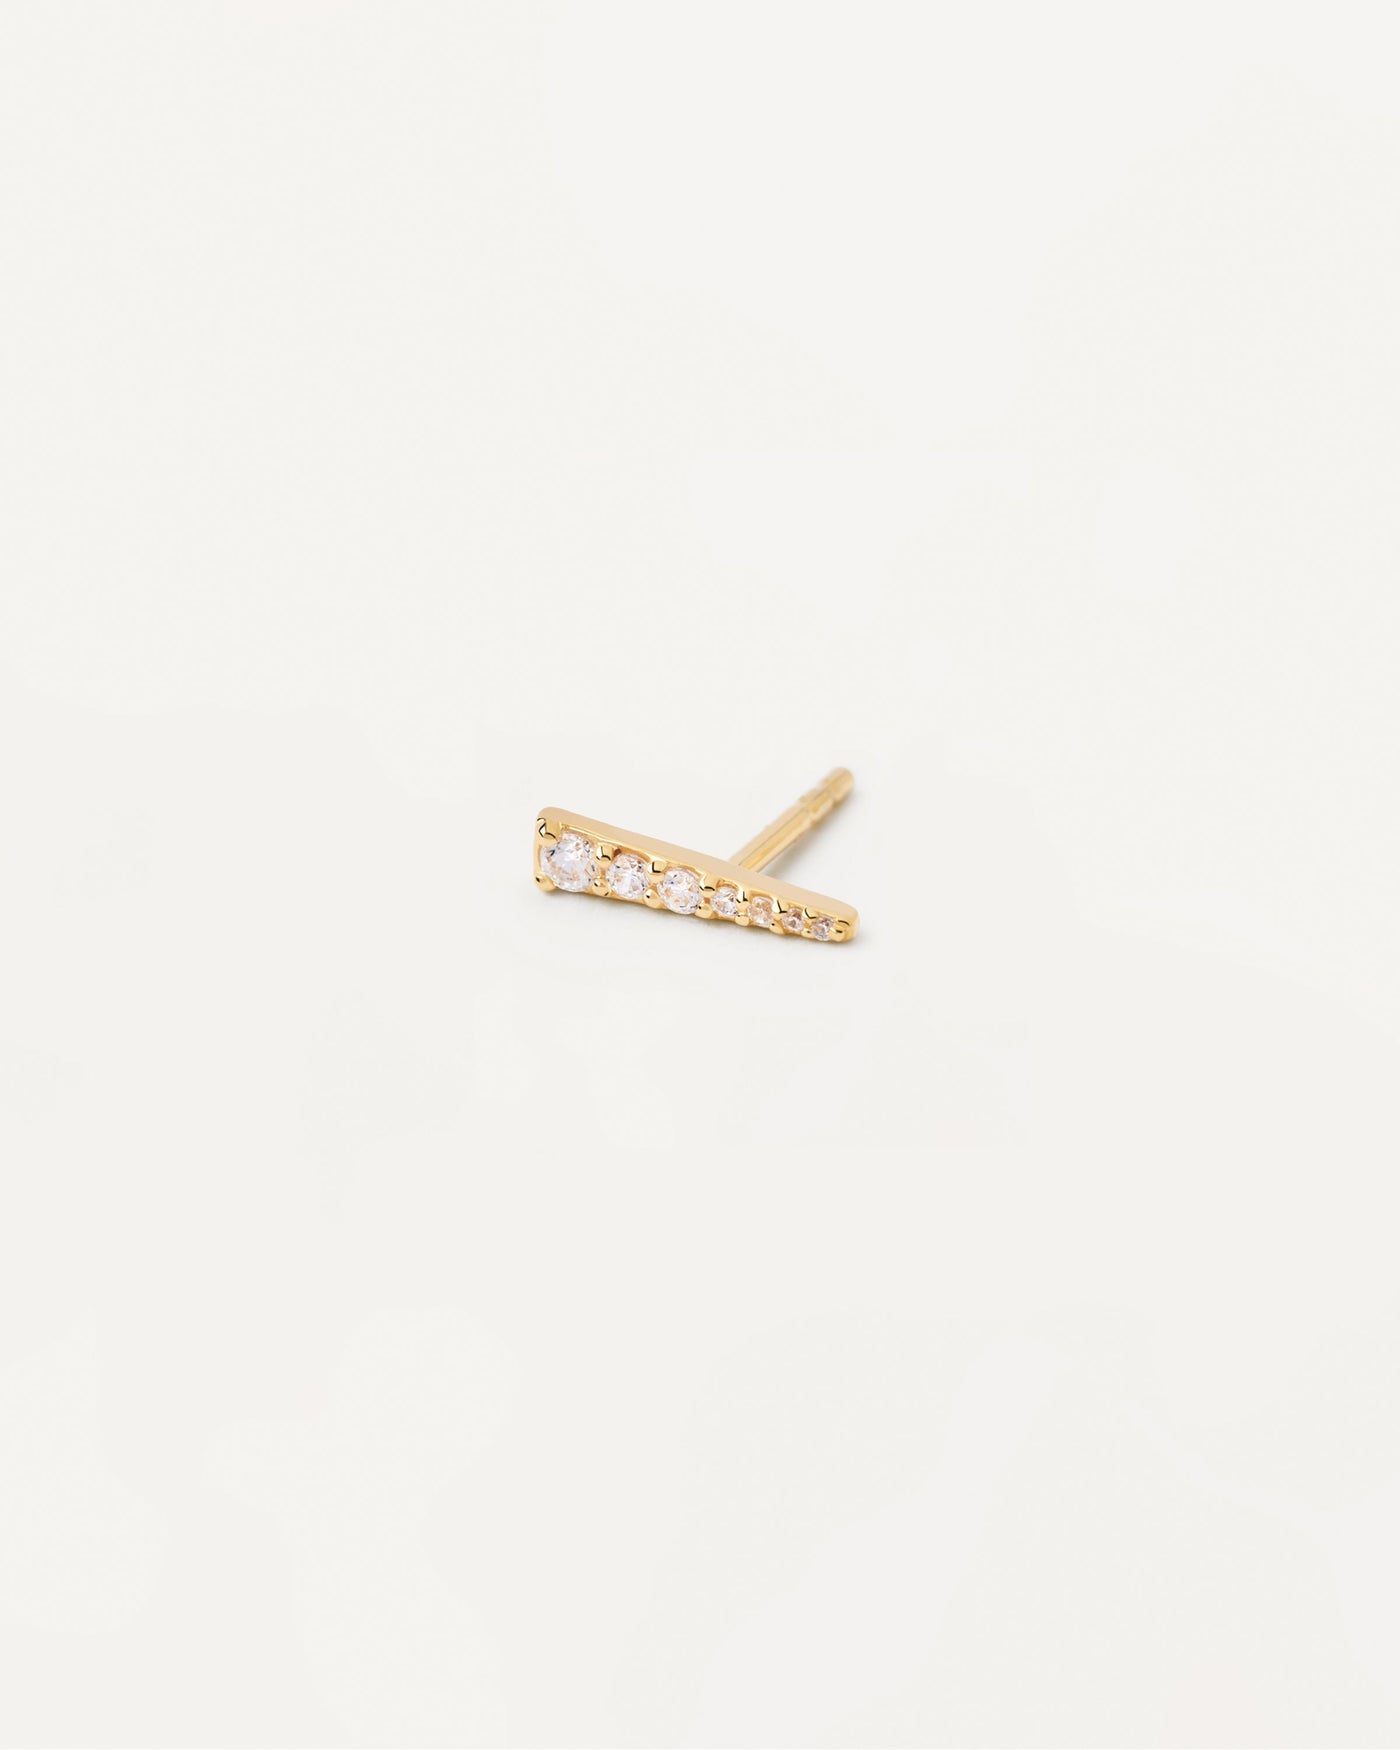 2023 Selection | Tea Single Earring. Gold-plated ear piercing in tip shape with white crystals. Get the latest arrival from PDPAOLA. Place your order safely and get this Best Seller. Free Shipping.